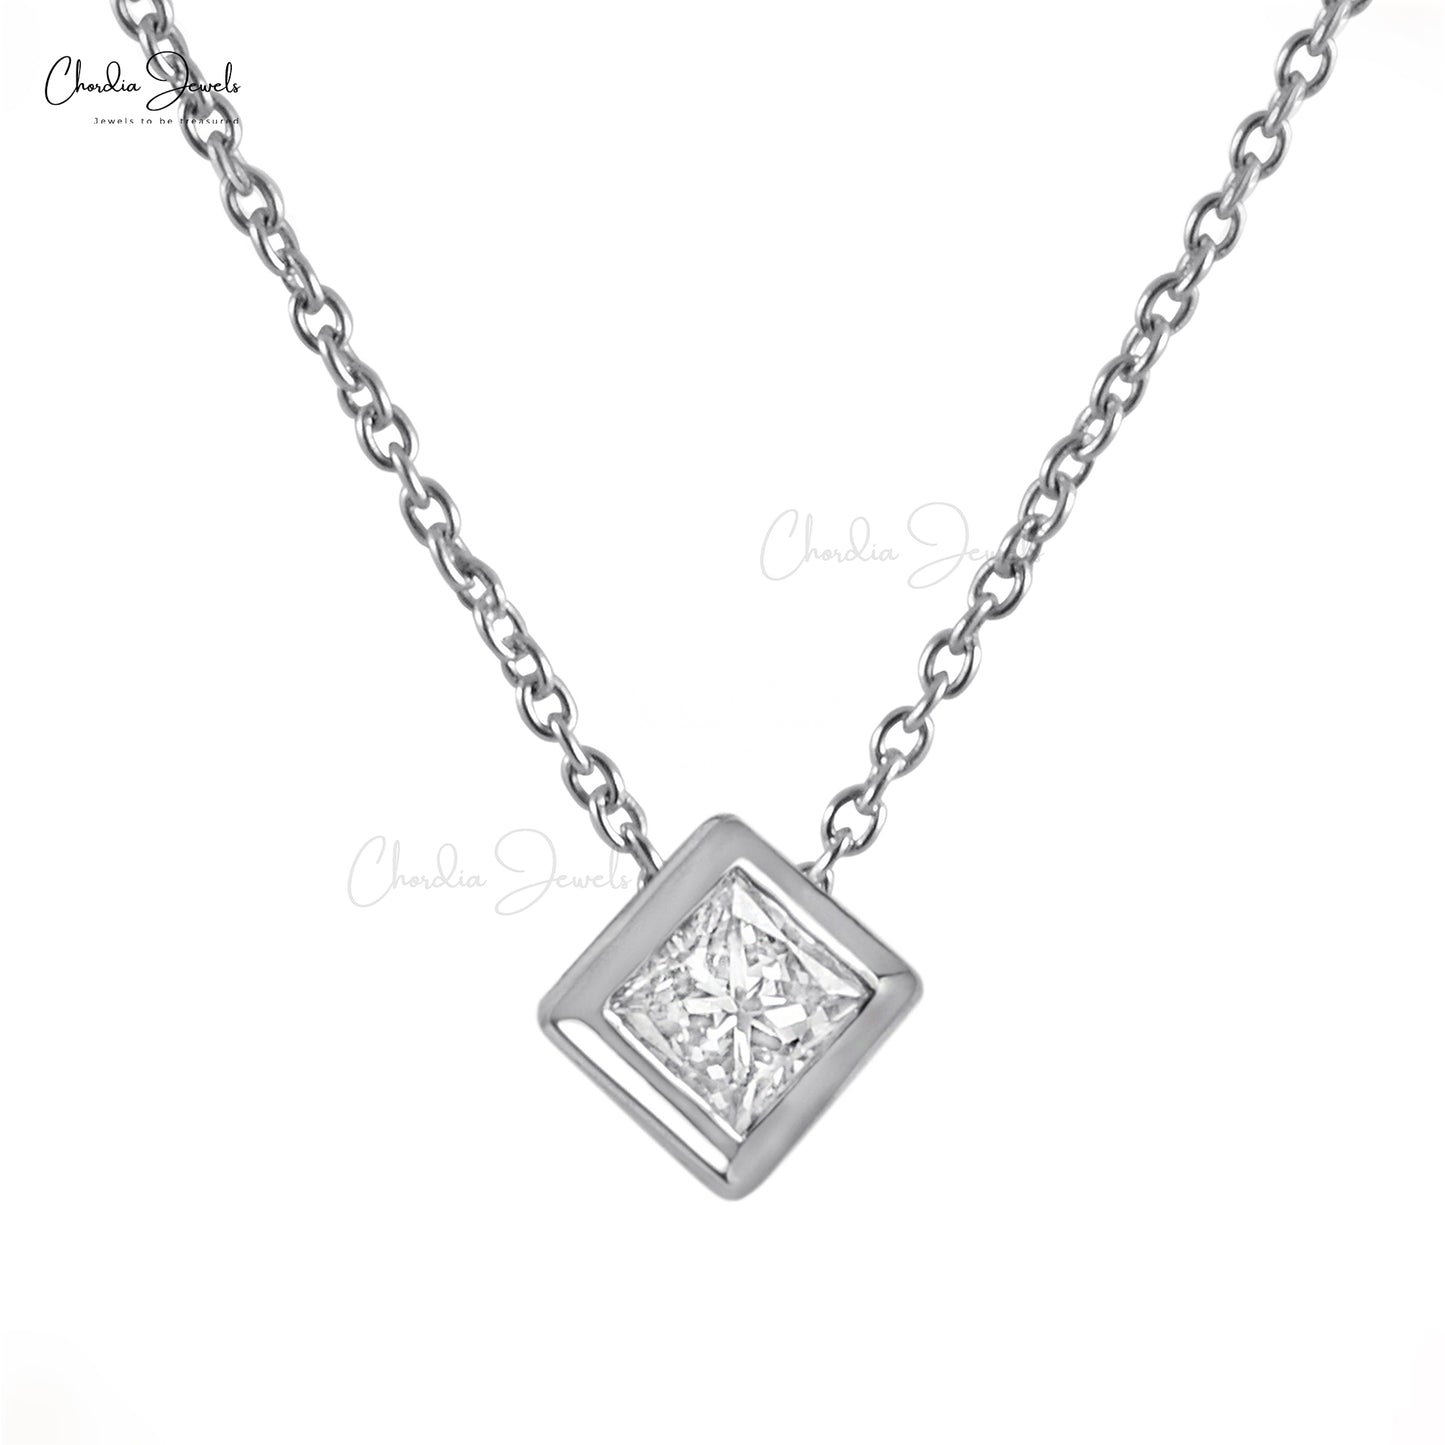 Solitaire Necklace With Natural o.o8ct White Diamond 14k White Gold Delicate Necklace For Her